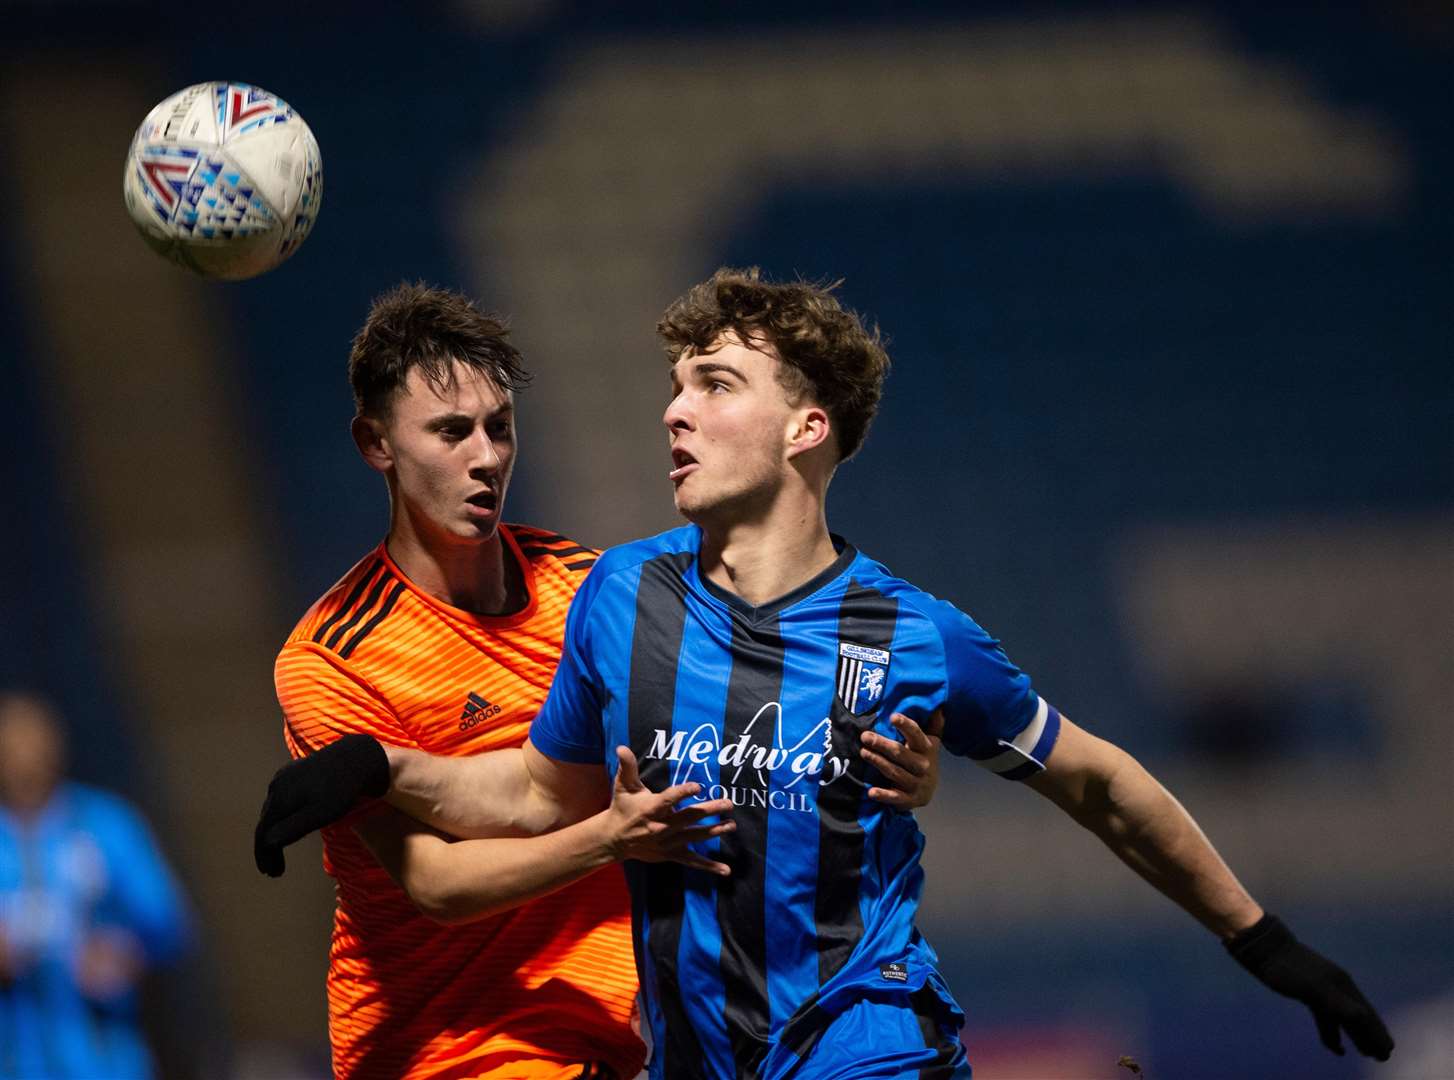 Roman Campbell in FA Youth Cup action for Gillingham against Ipswich